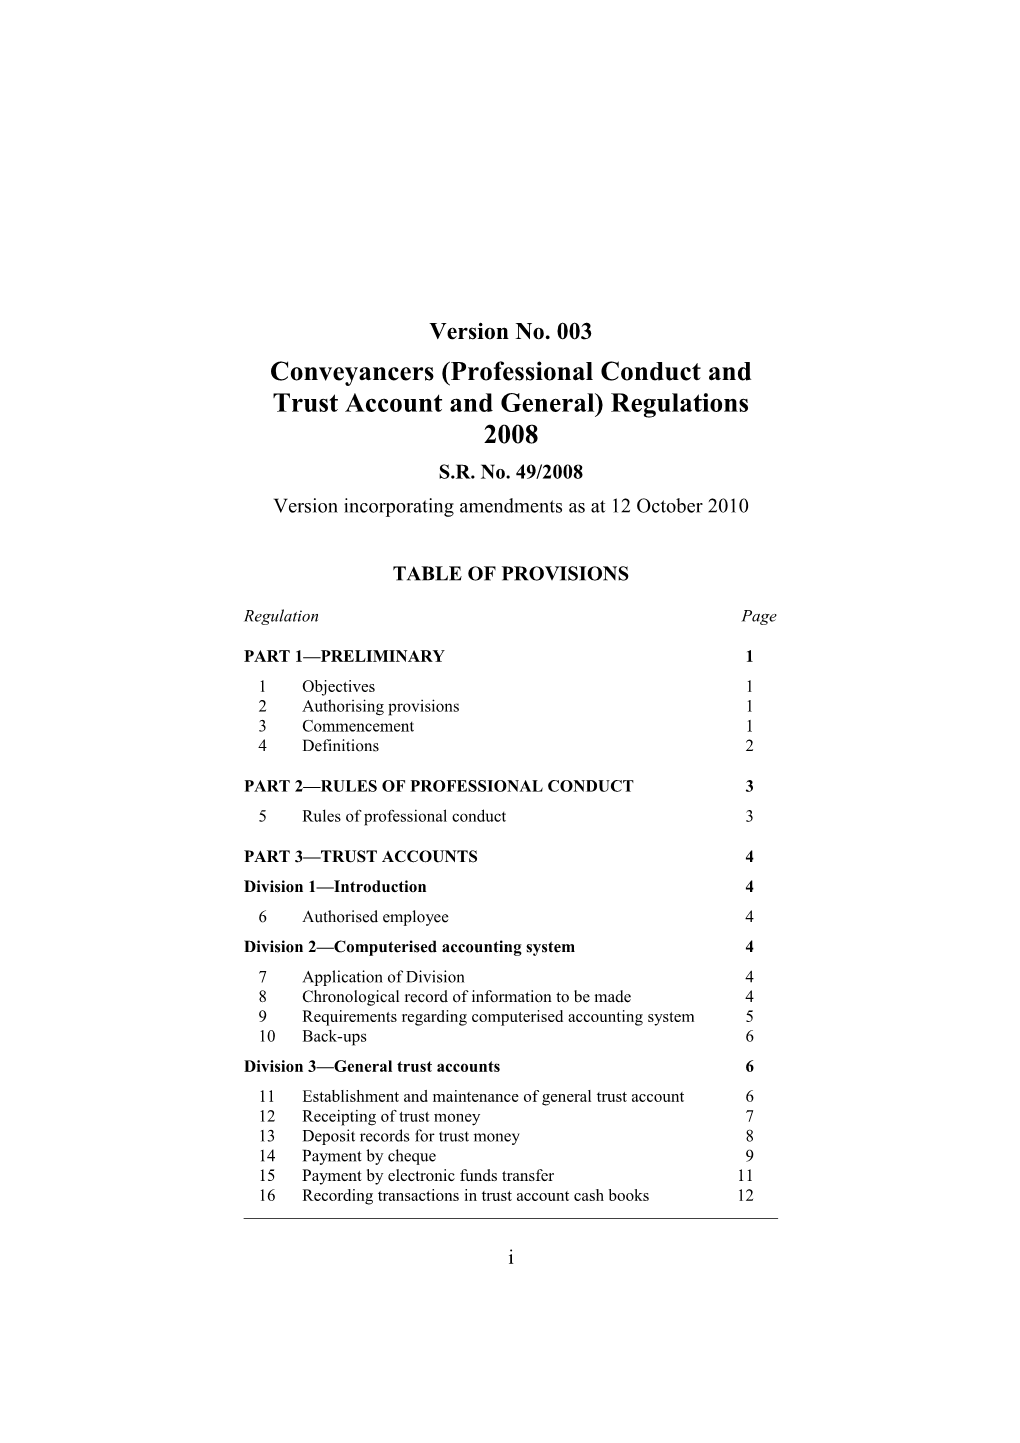 Conveyancers (Professional Conduct and Trust Account and General) Regulations 2008